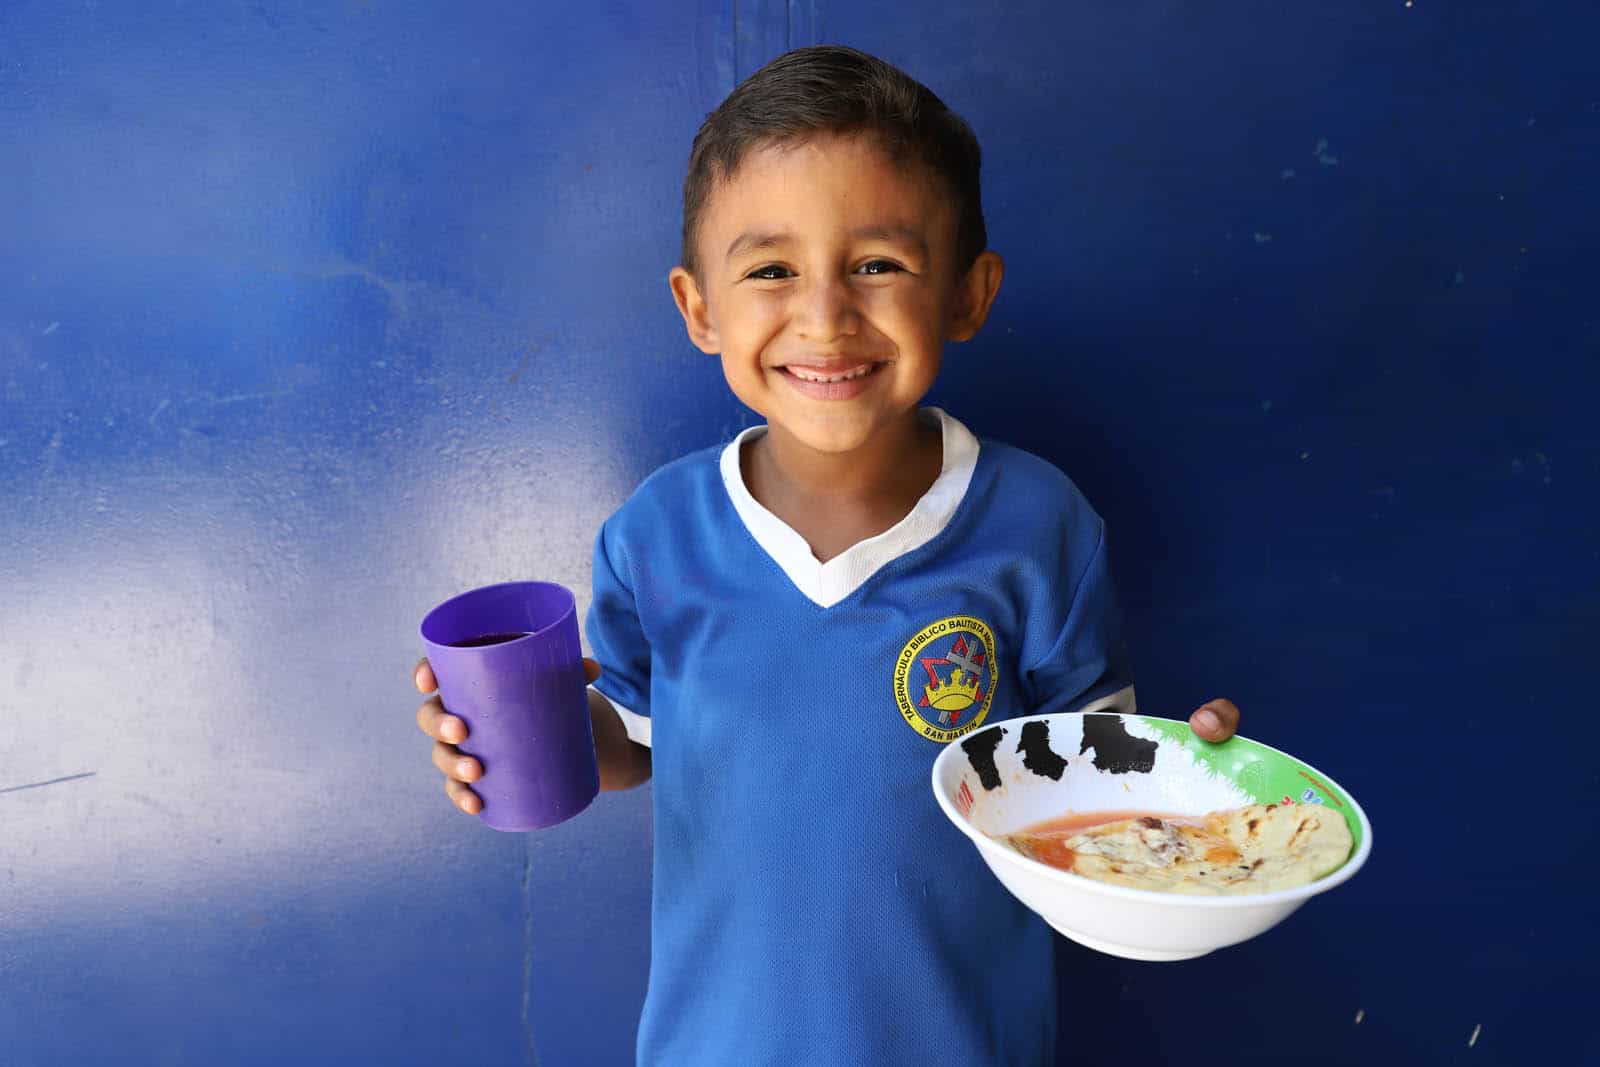 Boy wearing a blue shirt with white collar and the background is a blue wall of the kitchen’s front.